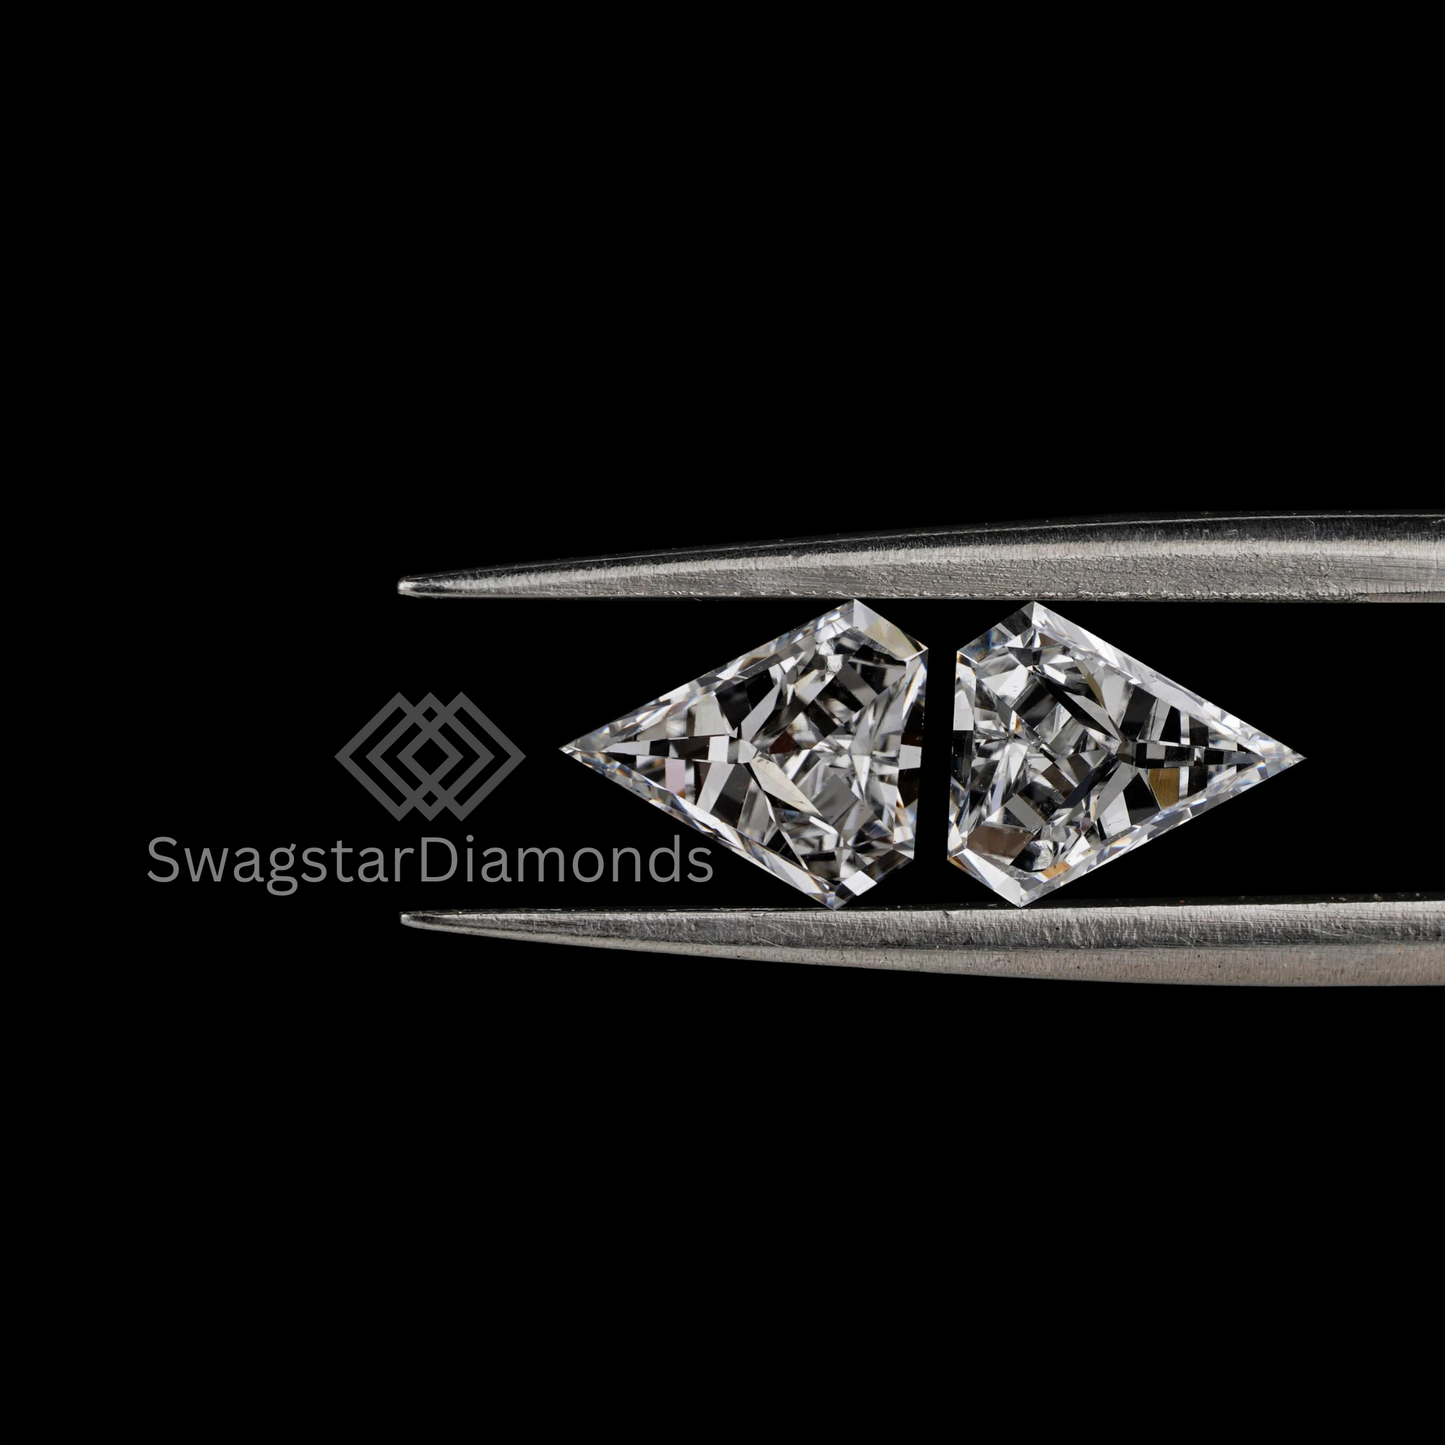 Shield Shape Diamonds With Lab-Grown & Natural Diamonds, Jewelry By Leading Manufacturer From Swagstar, Surat. Explore Wedding, Engagement, Eternity Rings, Earring & Studs, Bracelets In 10k, 14k, & 18k Gold Varieties, Including White, Yellow, Rose Gold.